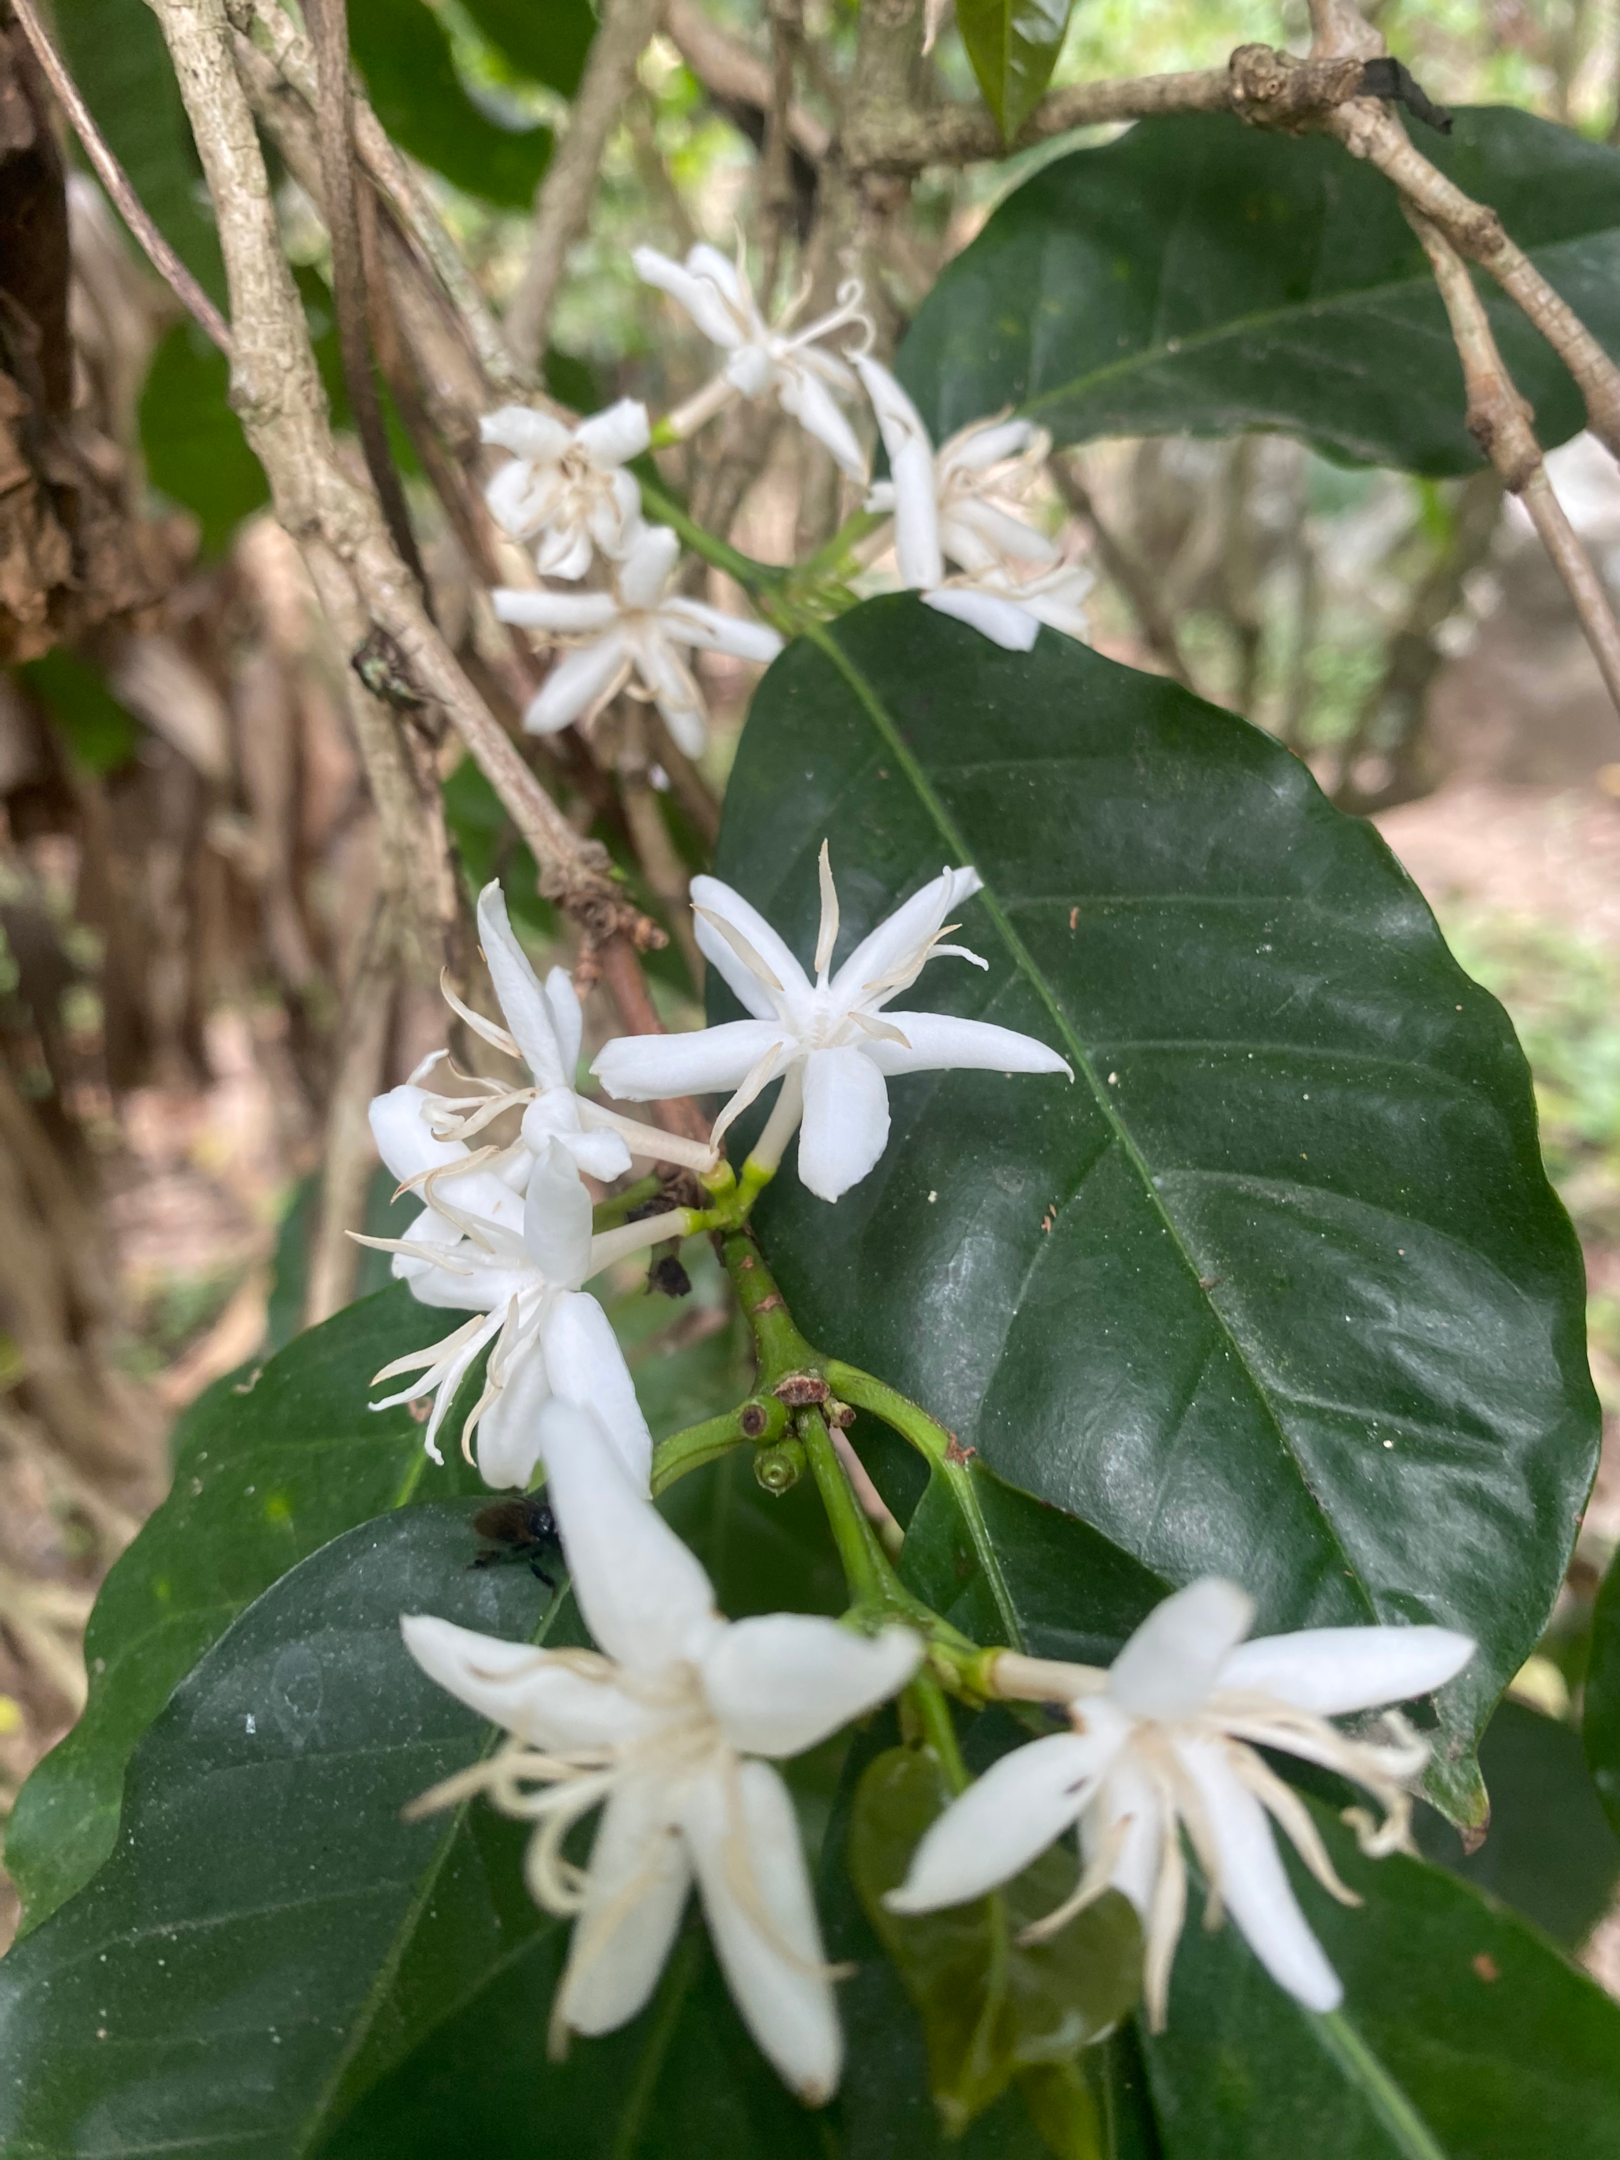 Coffee flowers in May.